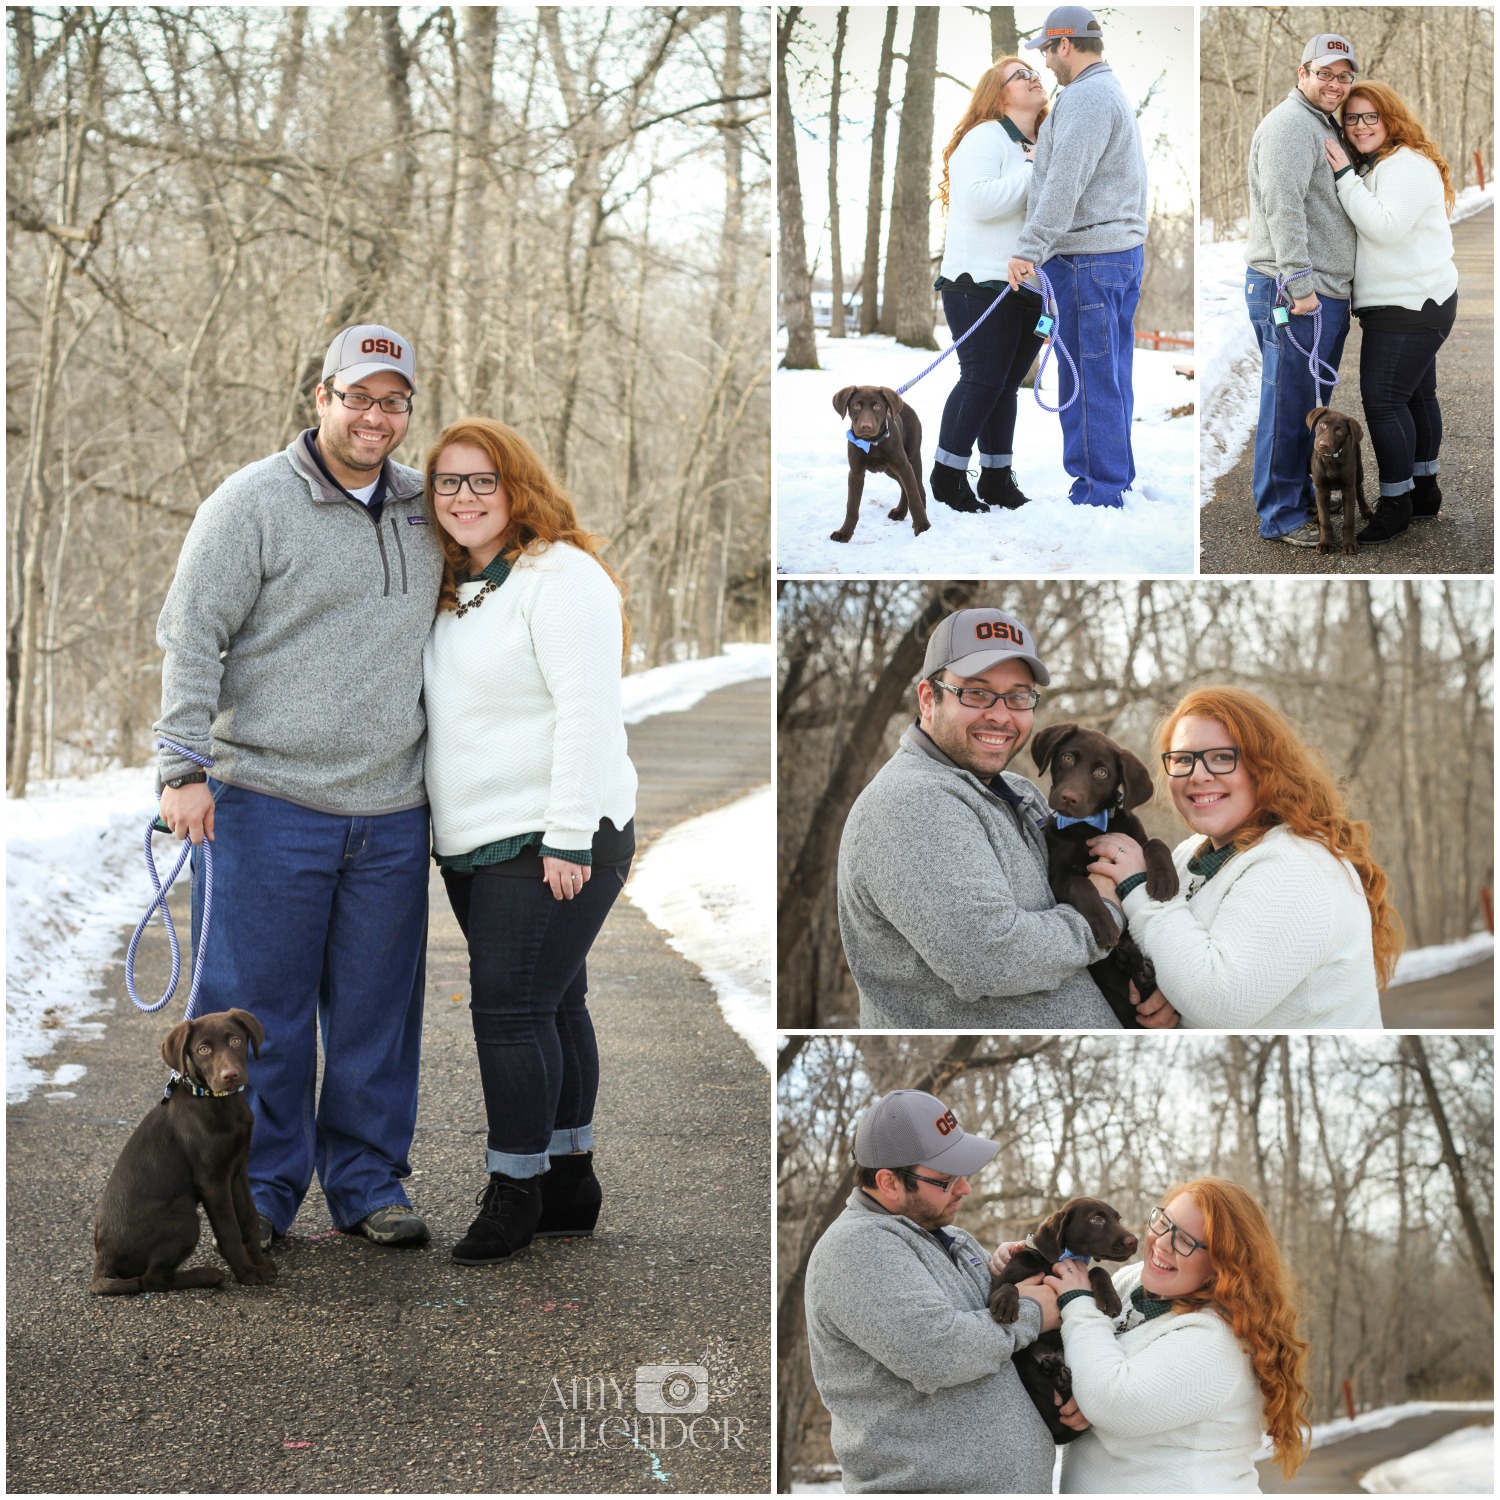 Engagement photos with a puppy